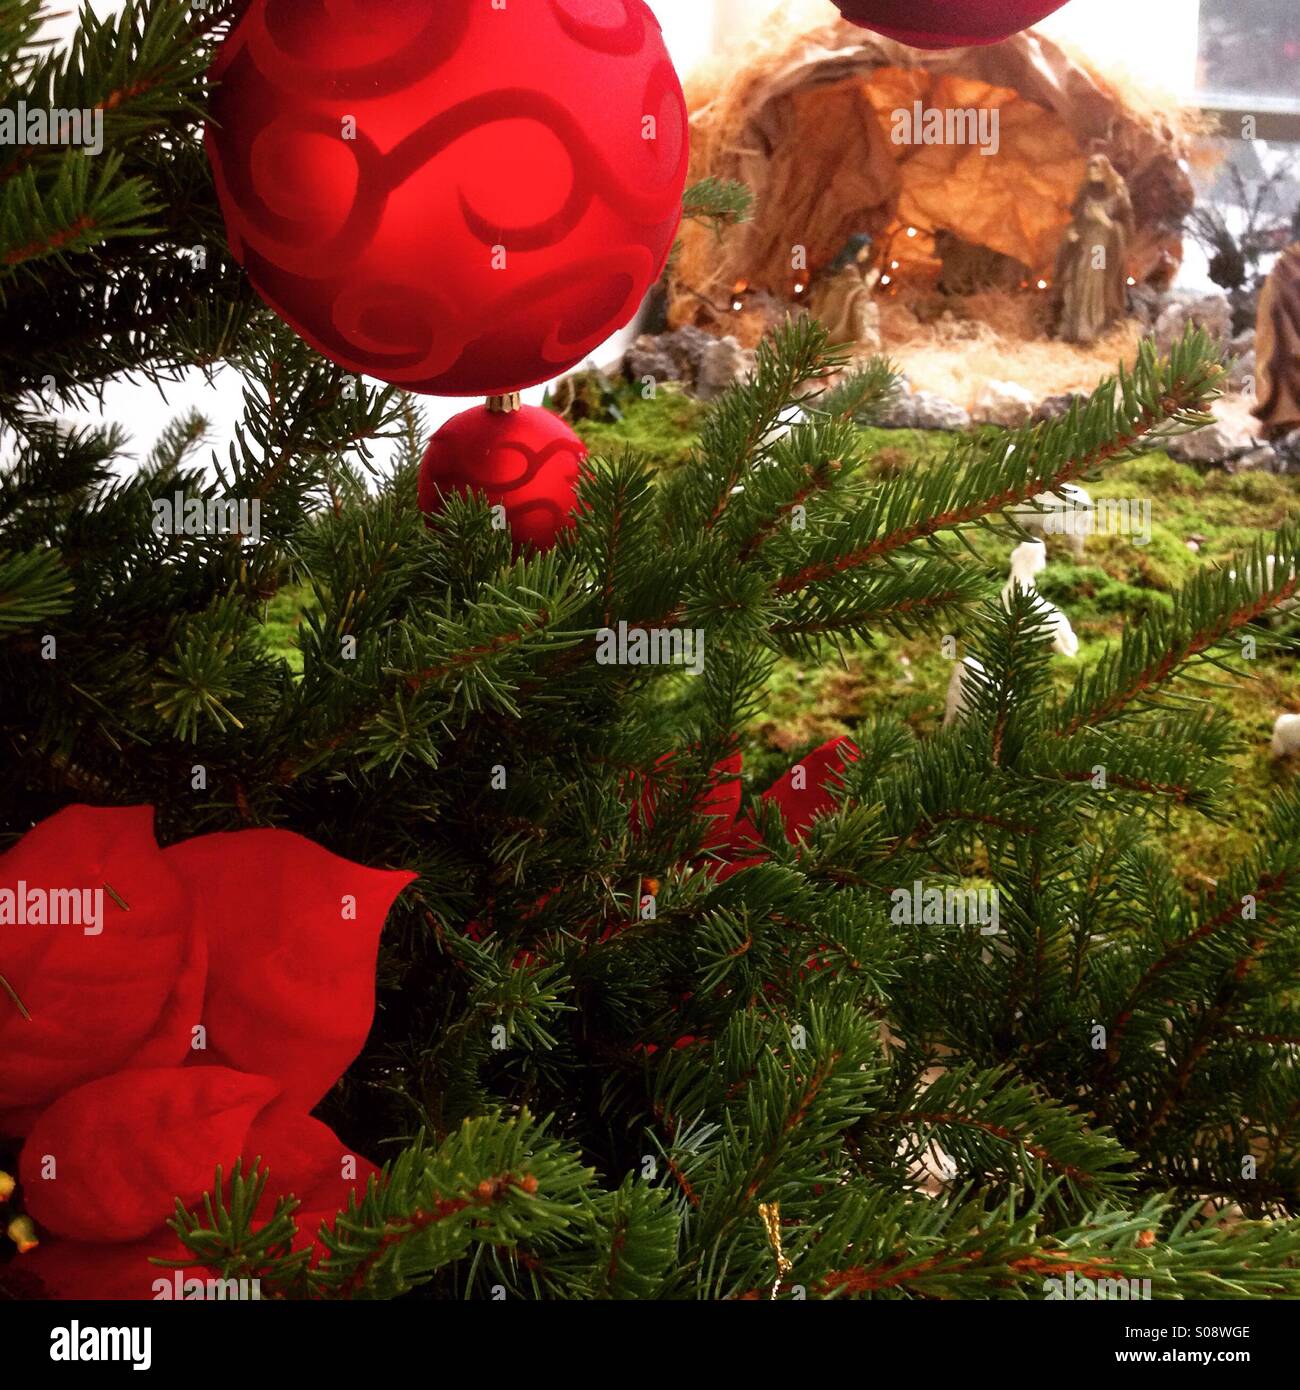 Christmas tree close up with christian figures in background Stock Photo